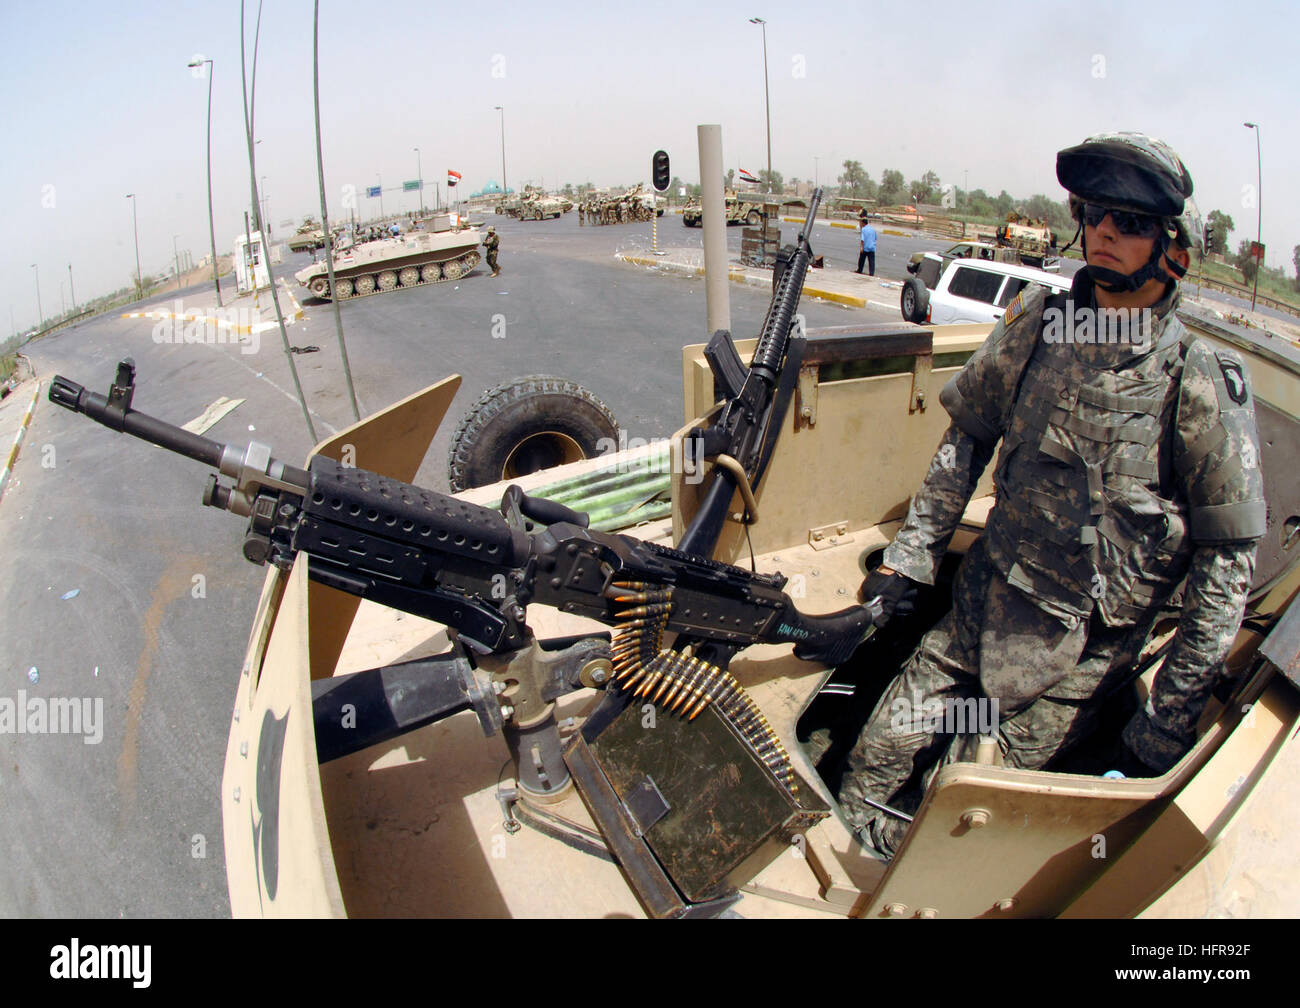 060820-N-7590D-199 Baghdad, Iraq (Aug. 20, 2006) - U.S. Army soldiers assigned to the 506th Regimental Combat Team, 101st Airborne Division assist the 6th Iraqi Army Division and Iraqi Police to secure the streets for Iraqi citizens. Iraqi citizens were observing the death of the 7th Imam, where one million Iraqi Shias are expected to gather at his burial site in Baghdad to mourn his passing. U.S. Navy photo by Mass Communication Specialists 1st Class Keith W. DeVinney (RELEASED) US Navy 060820-N-7590D-199 U.S. Army soldiers assigned to the 506th Regimental Combat Team, 101st Airborne Division Stock Photo